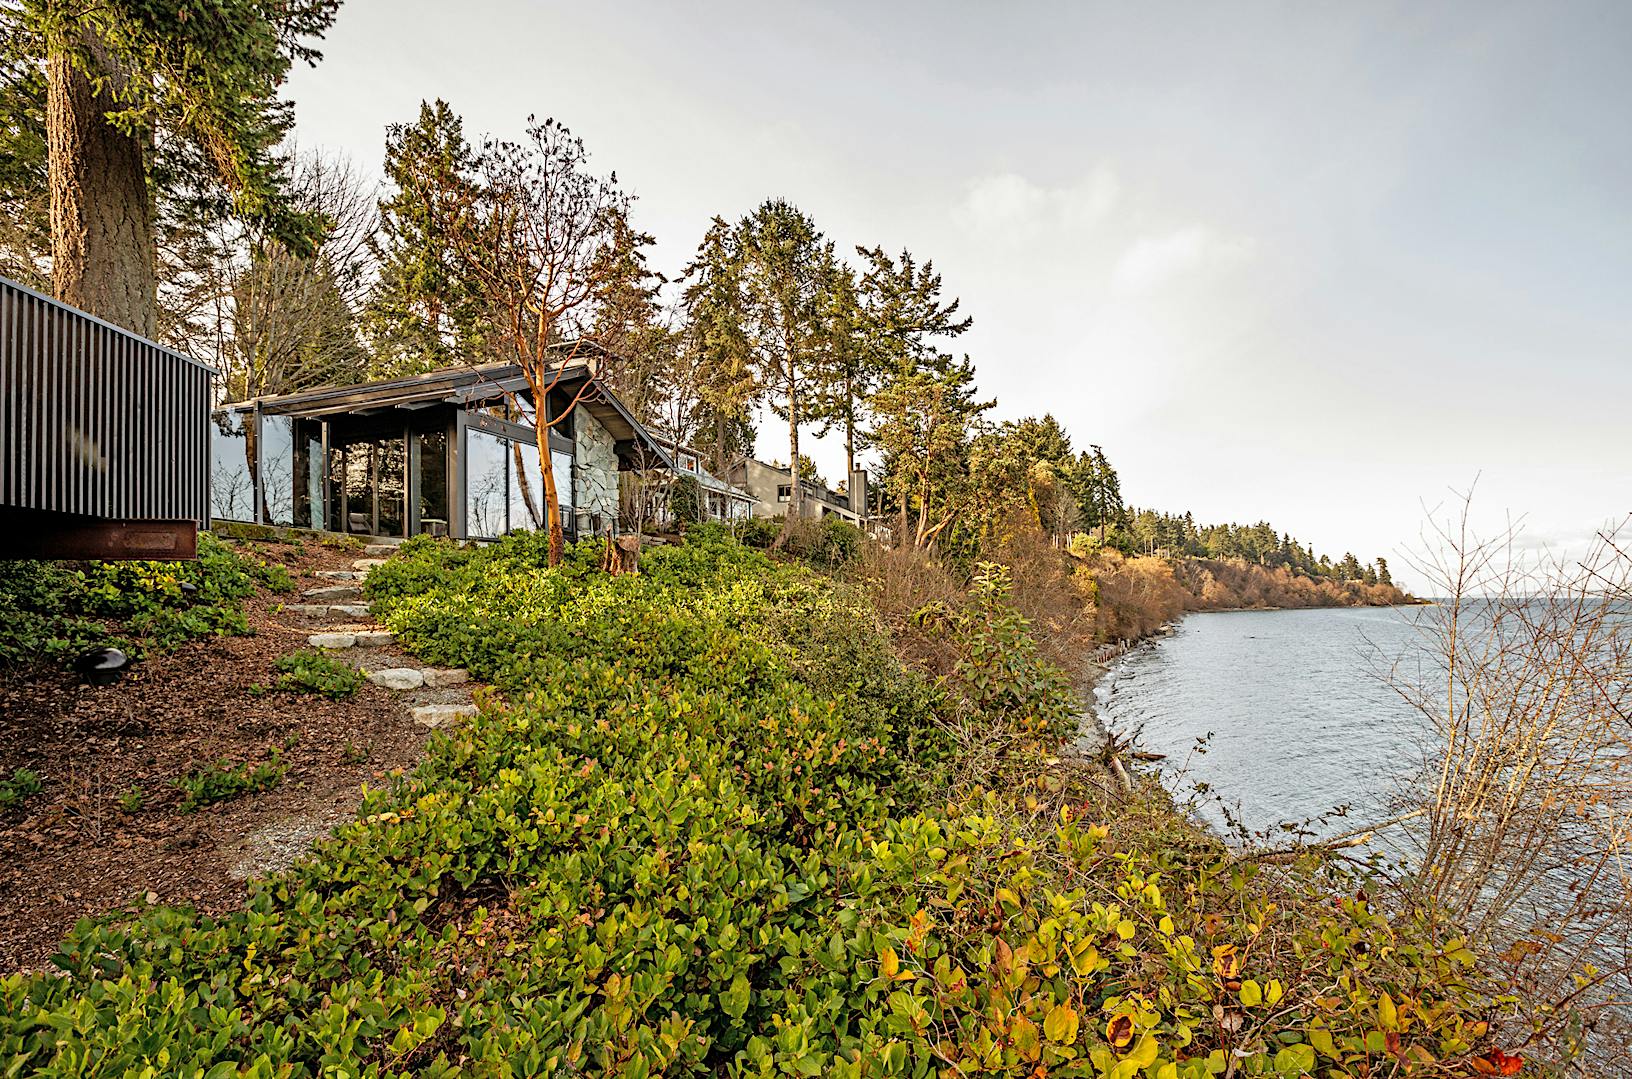 A house with large windows and glass doors is situated on a hillside overlooking a body of water.